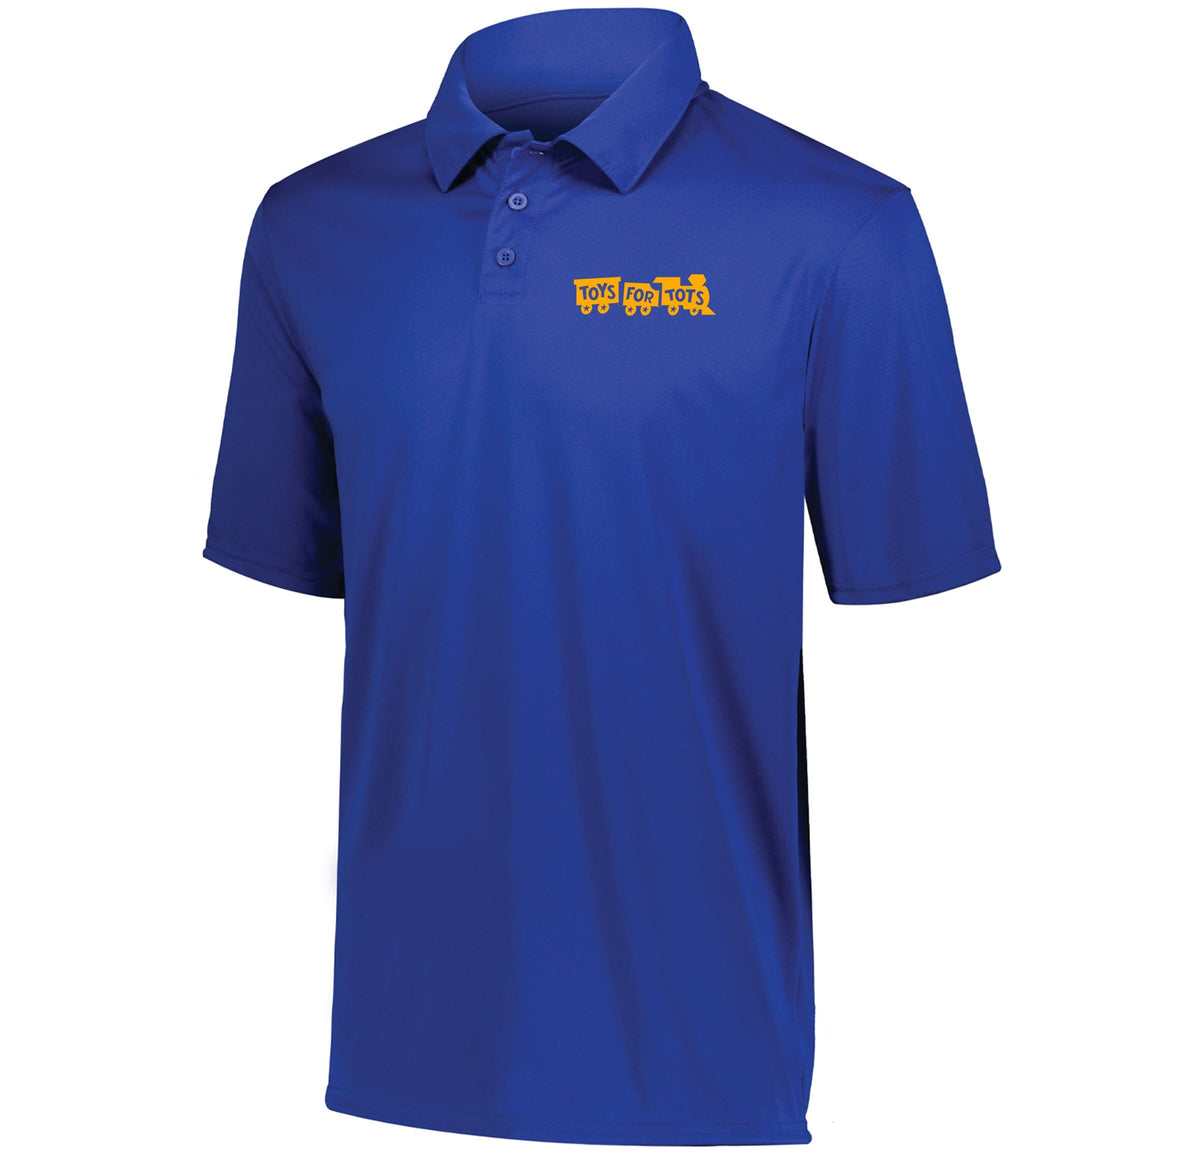 Gold TFT Chest Seal Screen-Printed Dri-Fit Performance Polo Polo Marine Corps Direct S ROYAL 